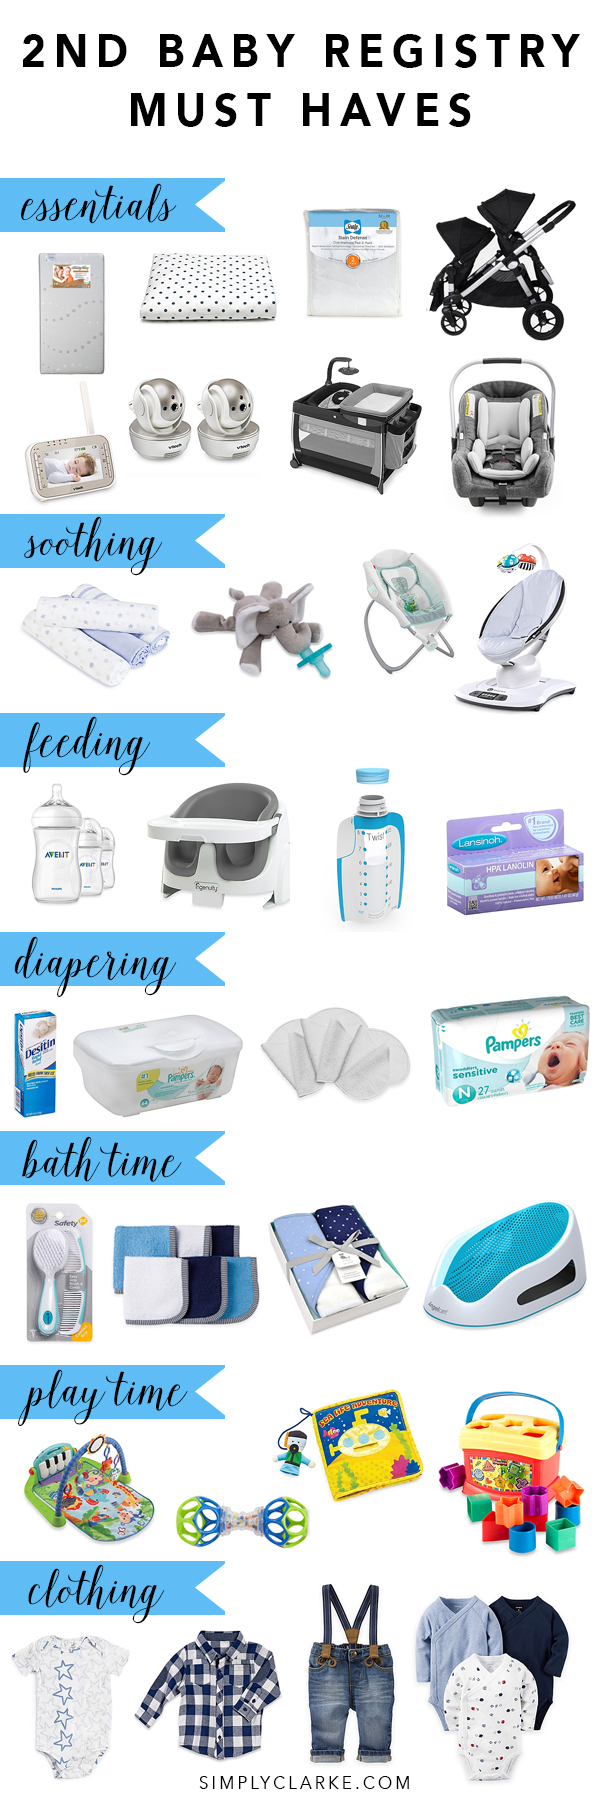 2nd-baby-registry-must-haves